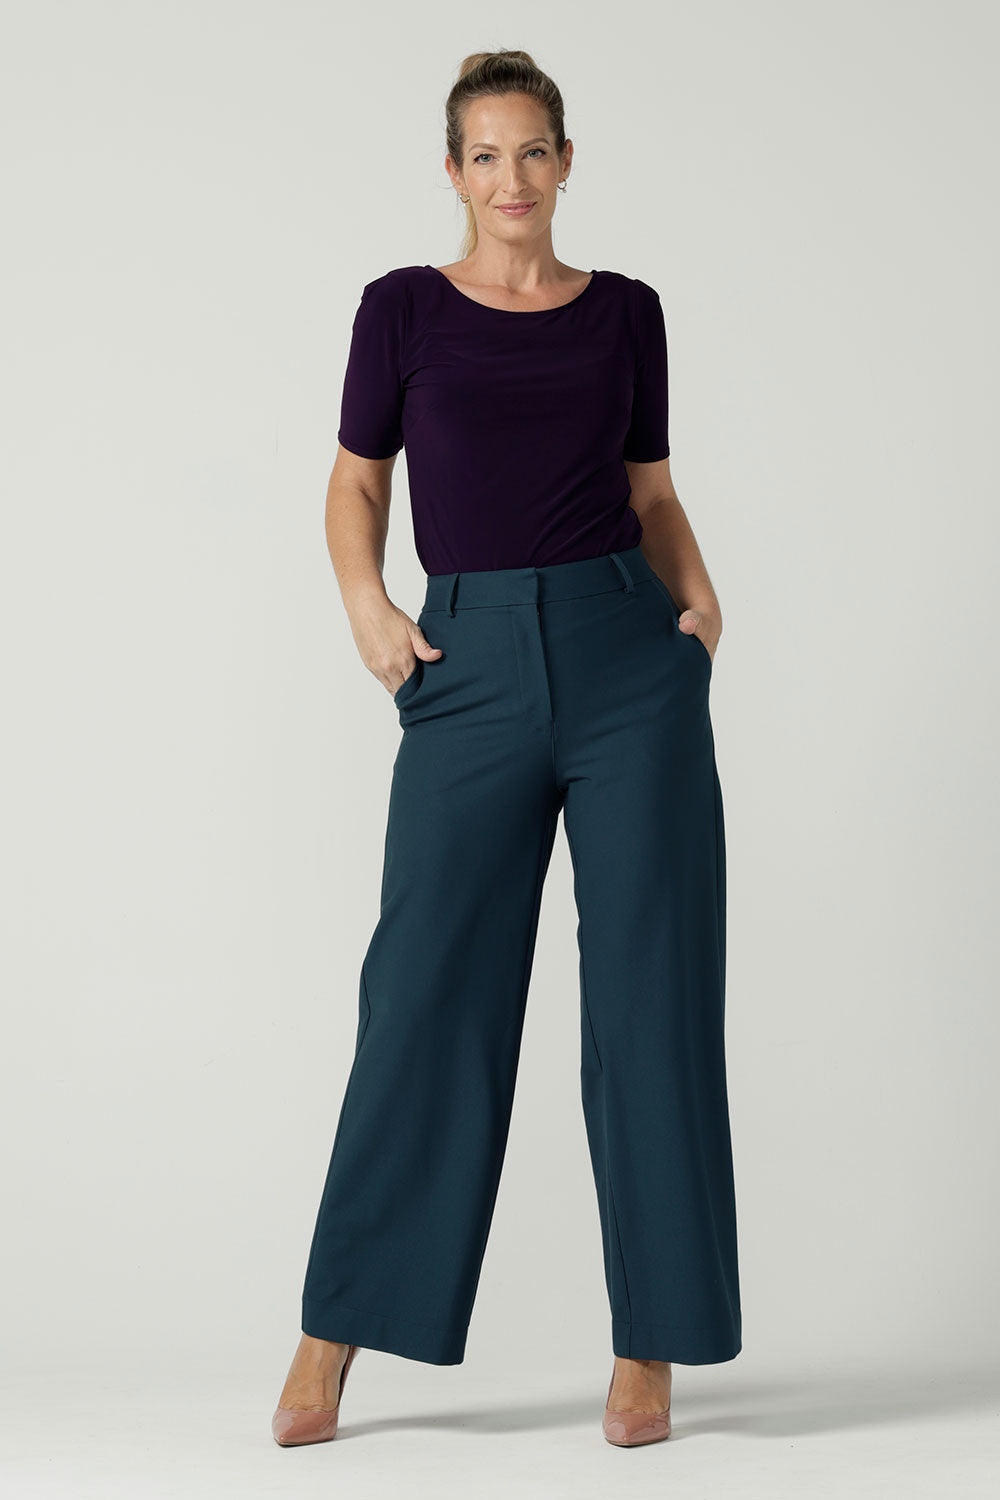 A Size 10 woman wears the Ziggy top in Amethyst, a boat neckline style with a pleat tuck on the sleeve head and slight curve hem. Made in Australia for women size 8 - 24.